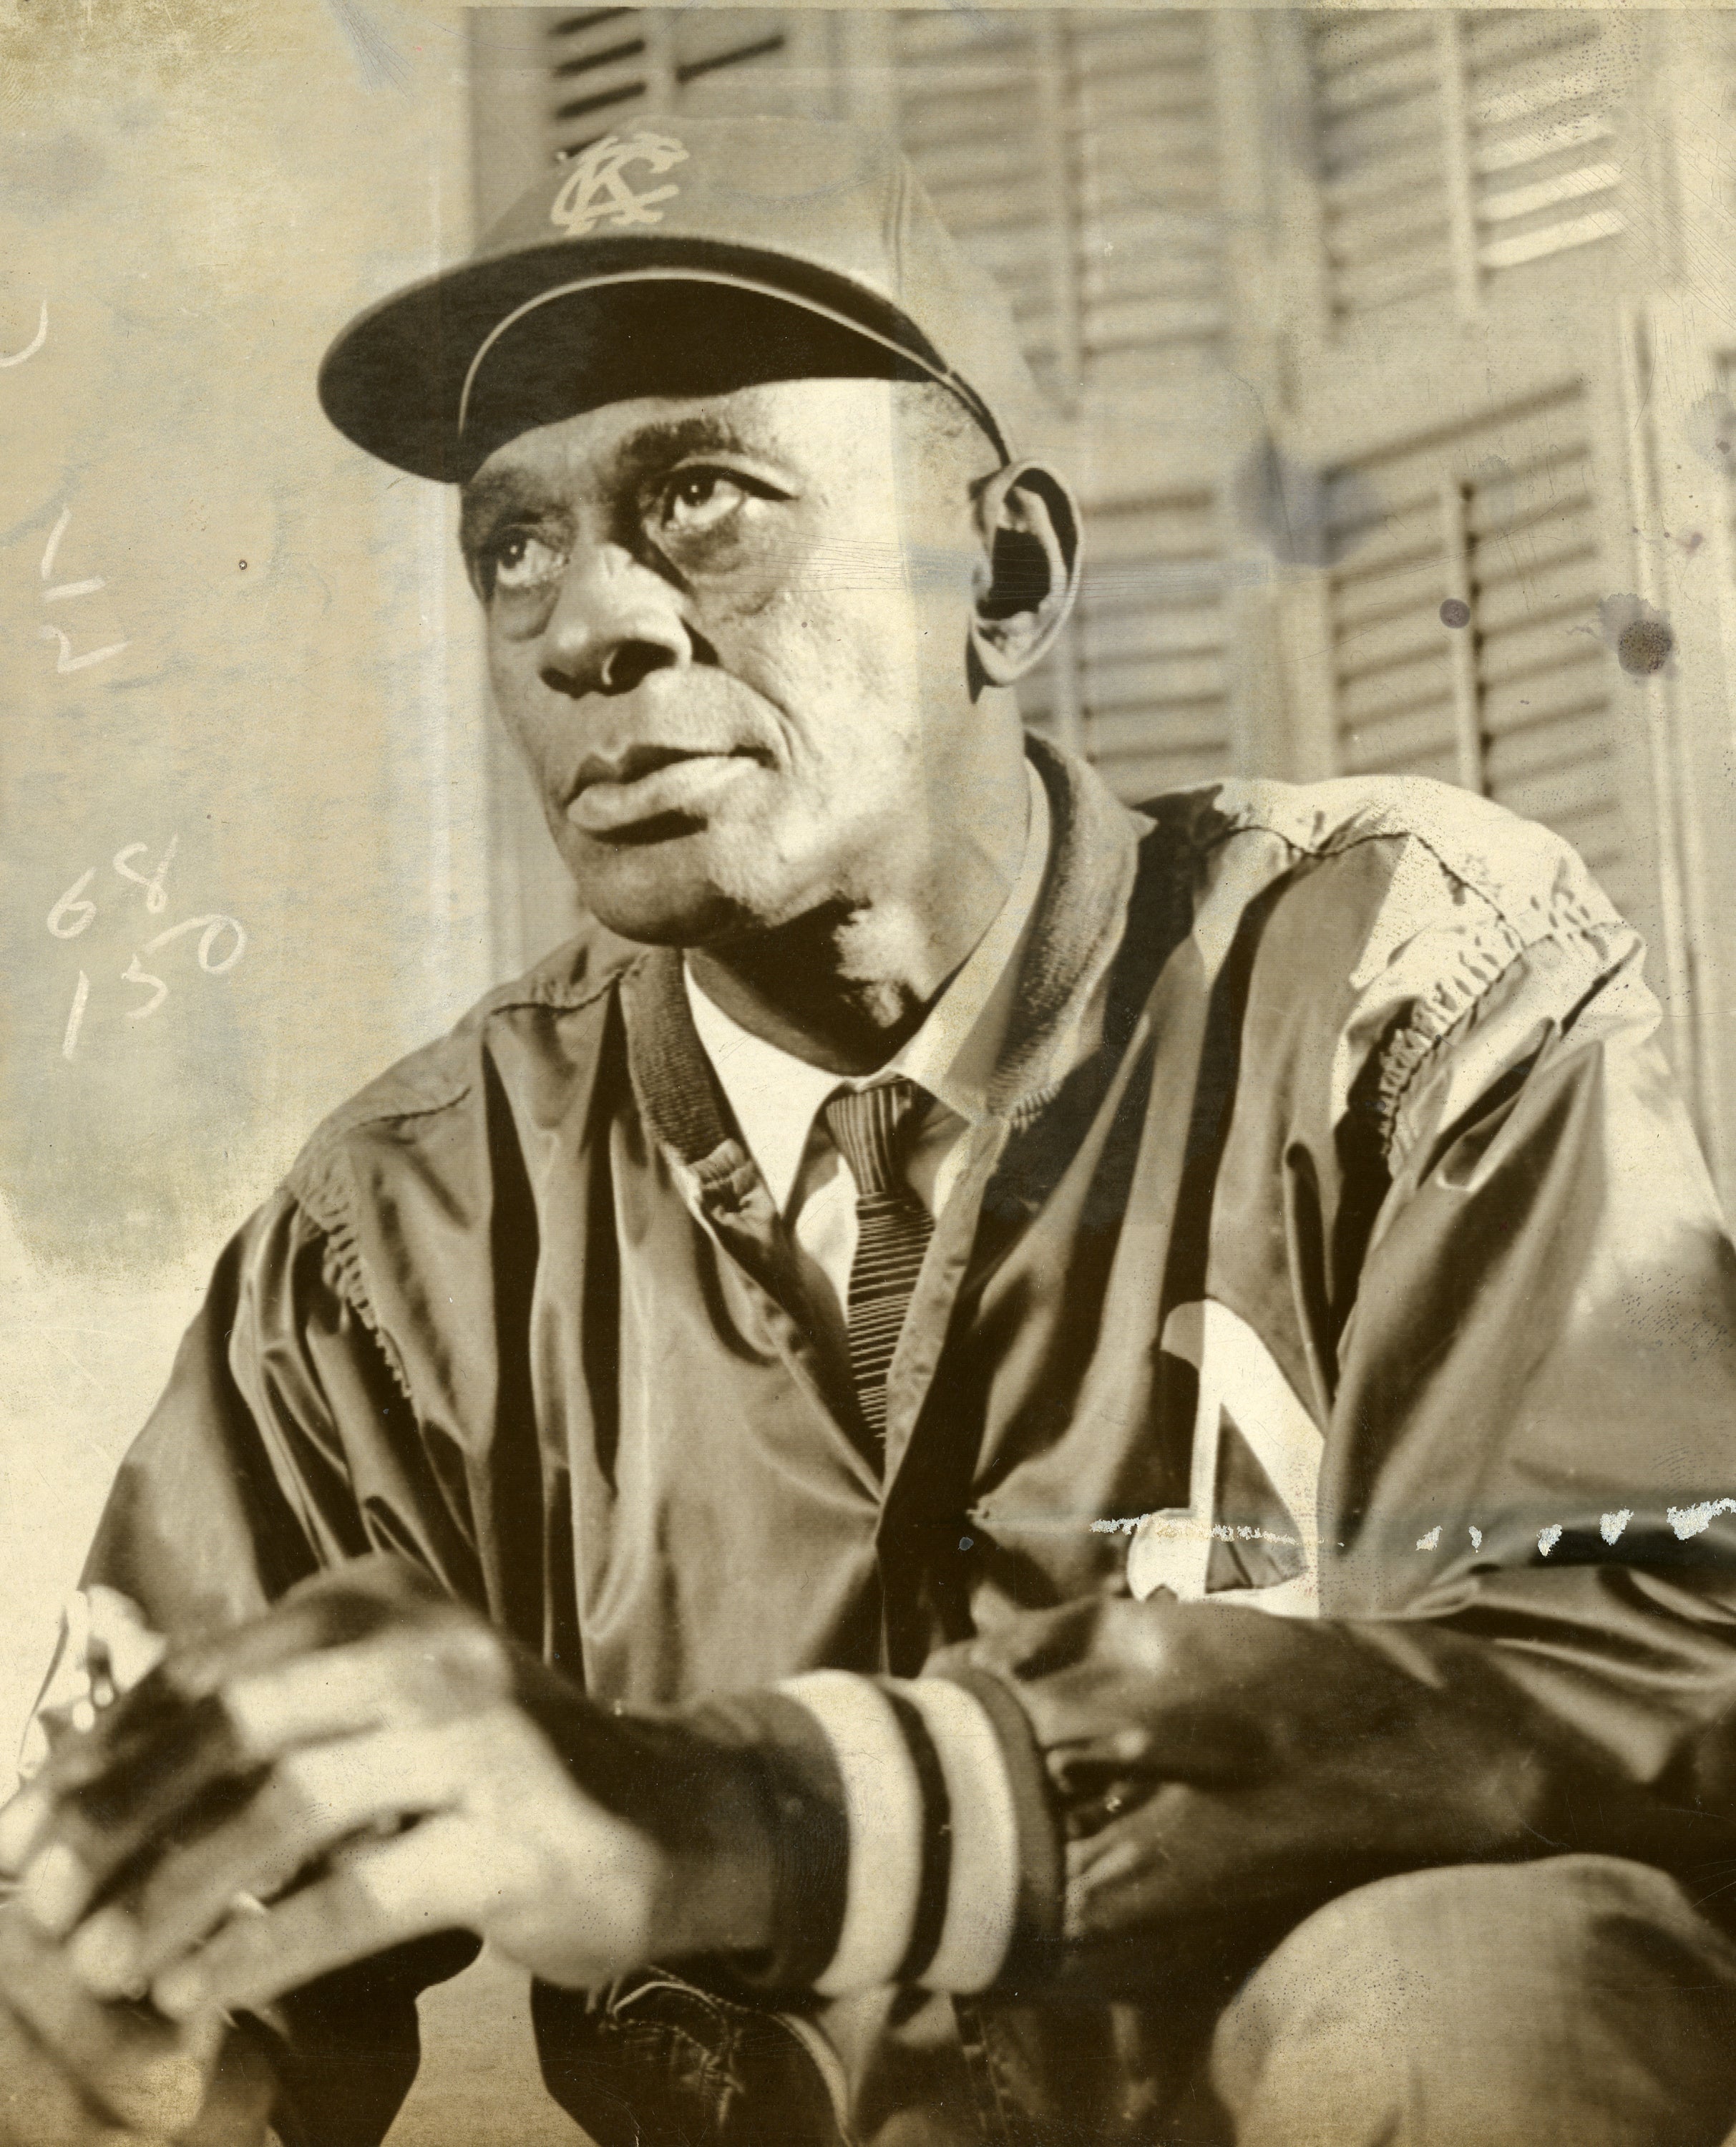 Satchel Paige pitches for A’s at age 59